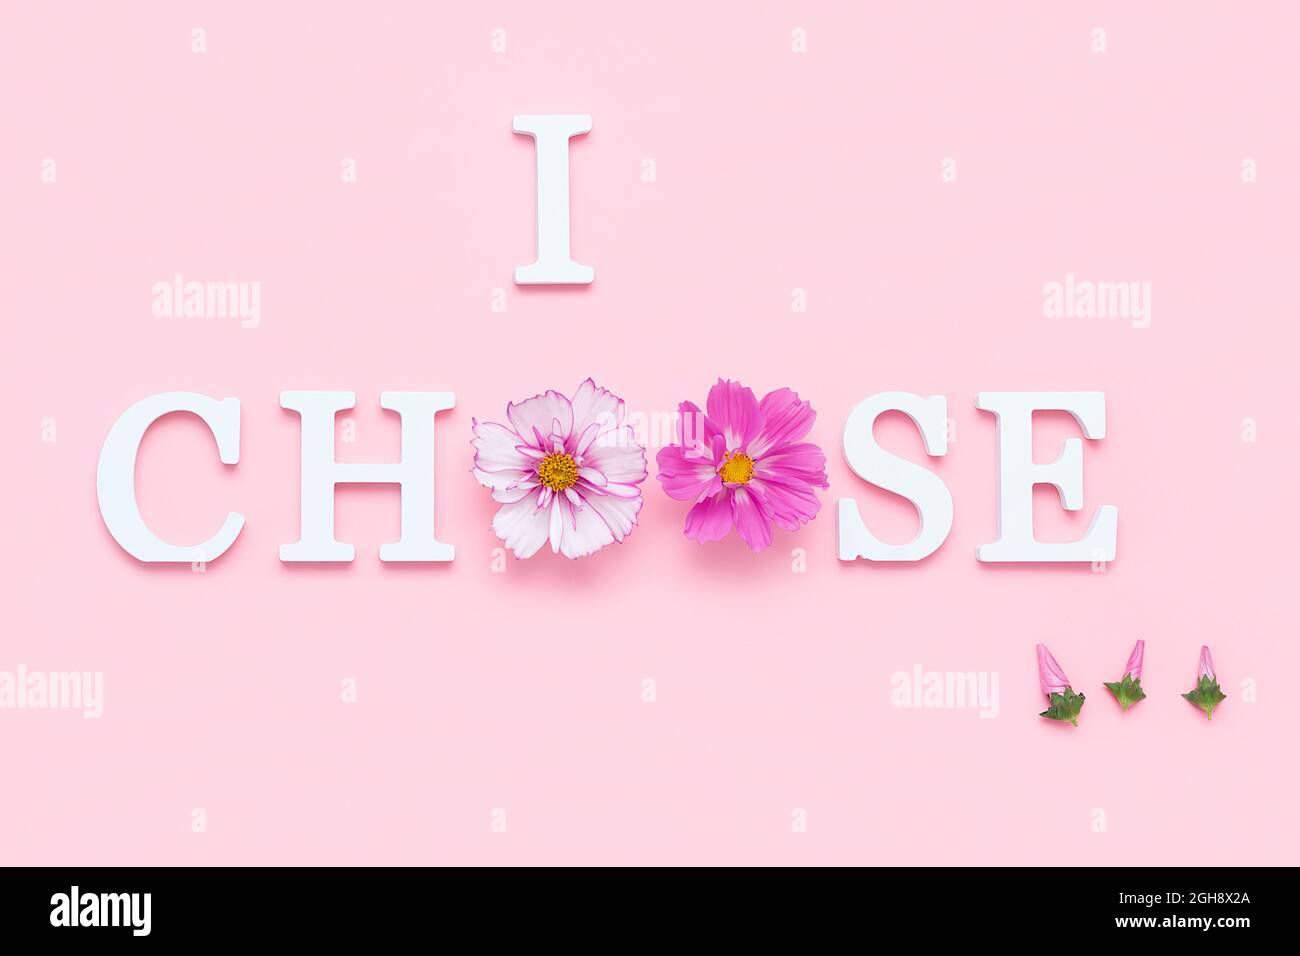 I choose... Motivational quote from white letters and beauty natural flowers on pink background. Creative concept inspirational quote of the day. Stock Photo